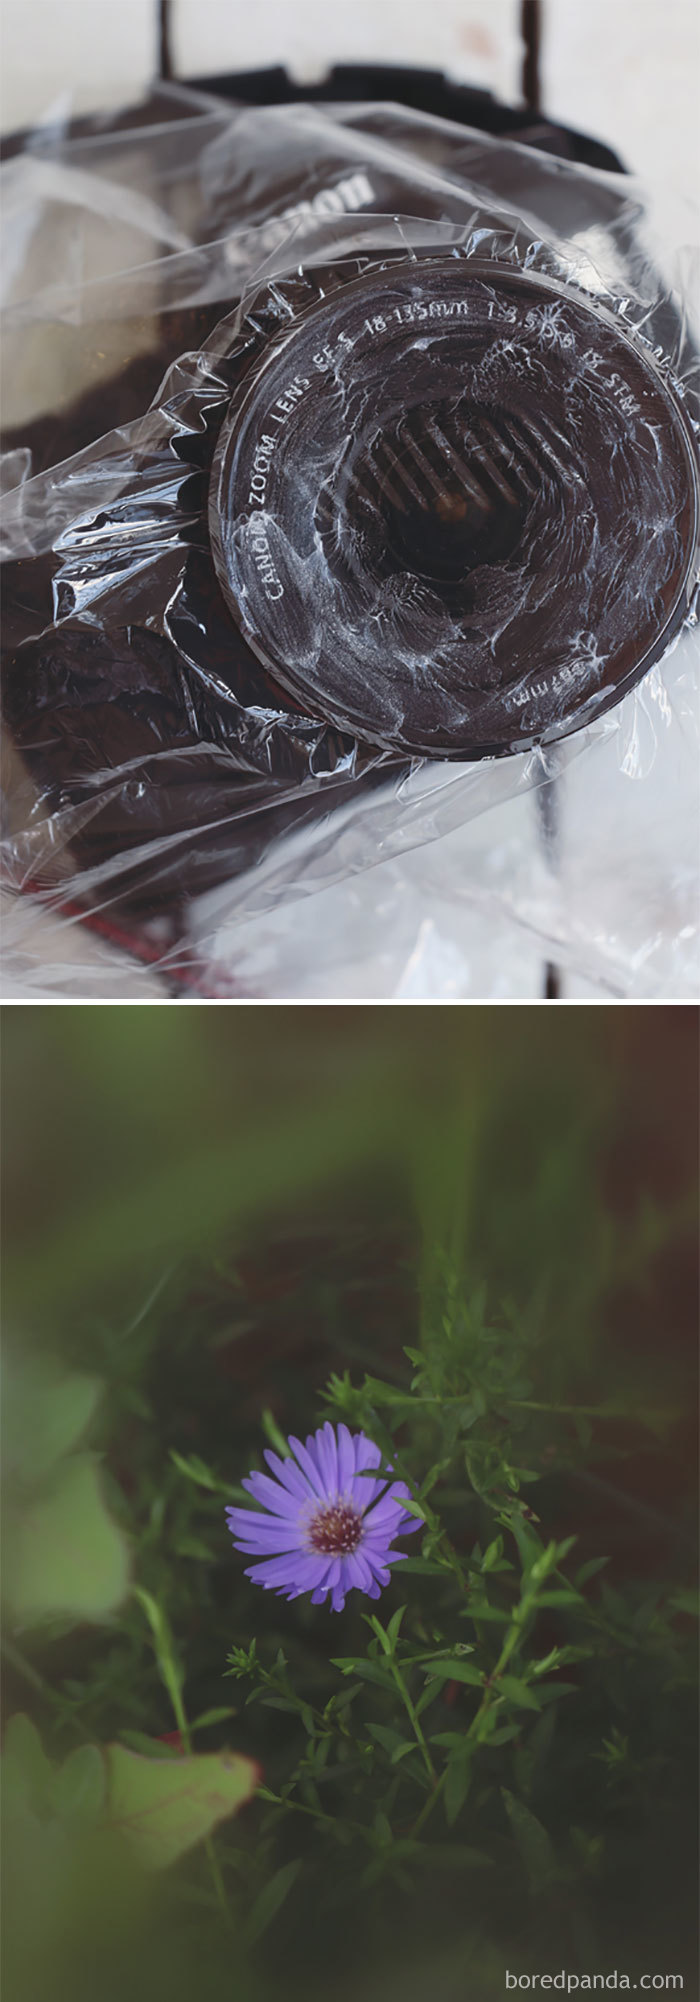 Use A Plastic Bag Smeared With Vaseline For A Soft-Focus Lens Effect